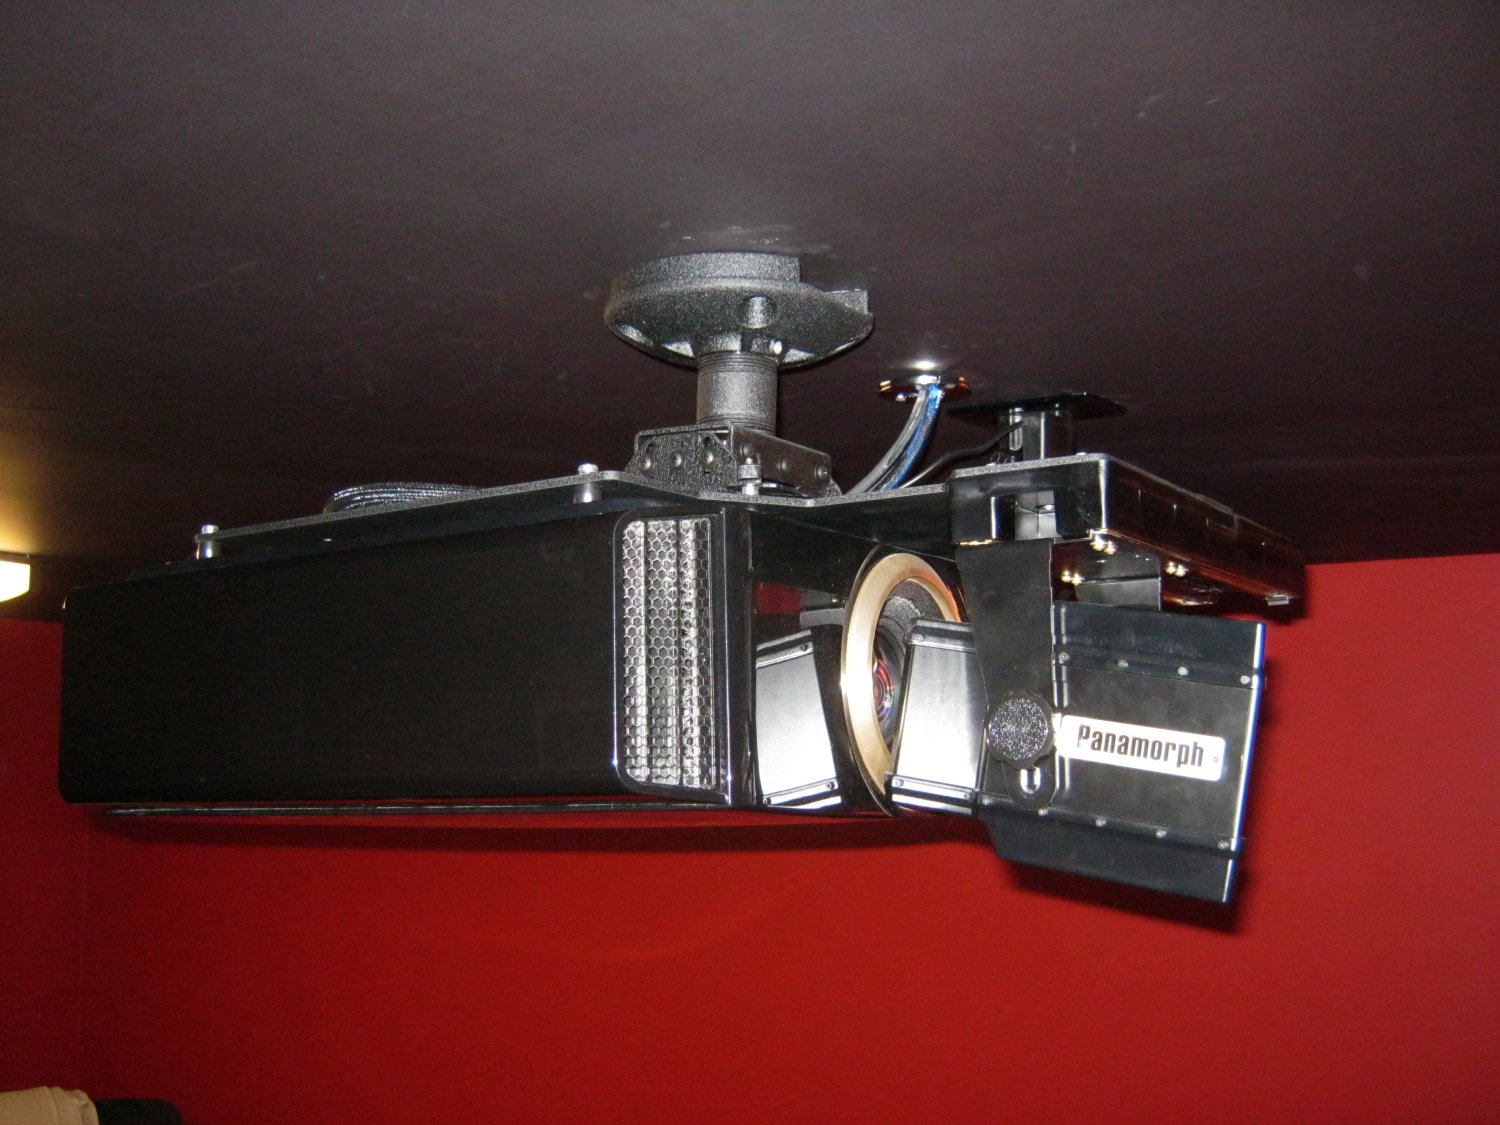 JVC RS40 Projector with Panamorph Lens